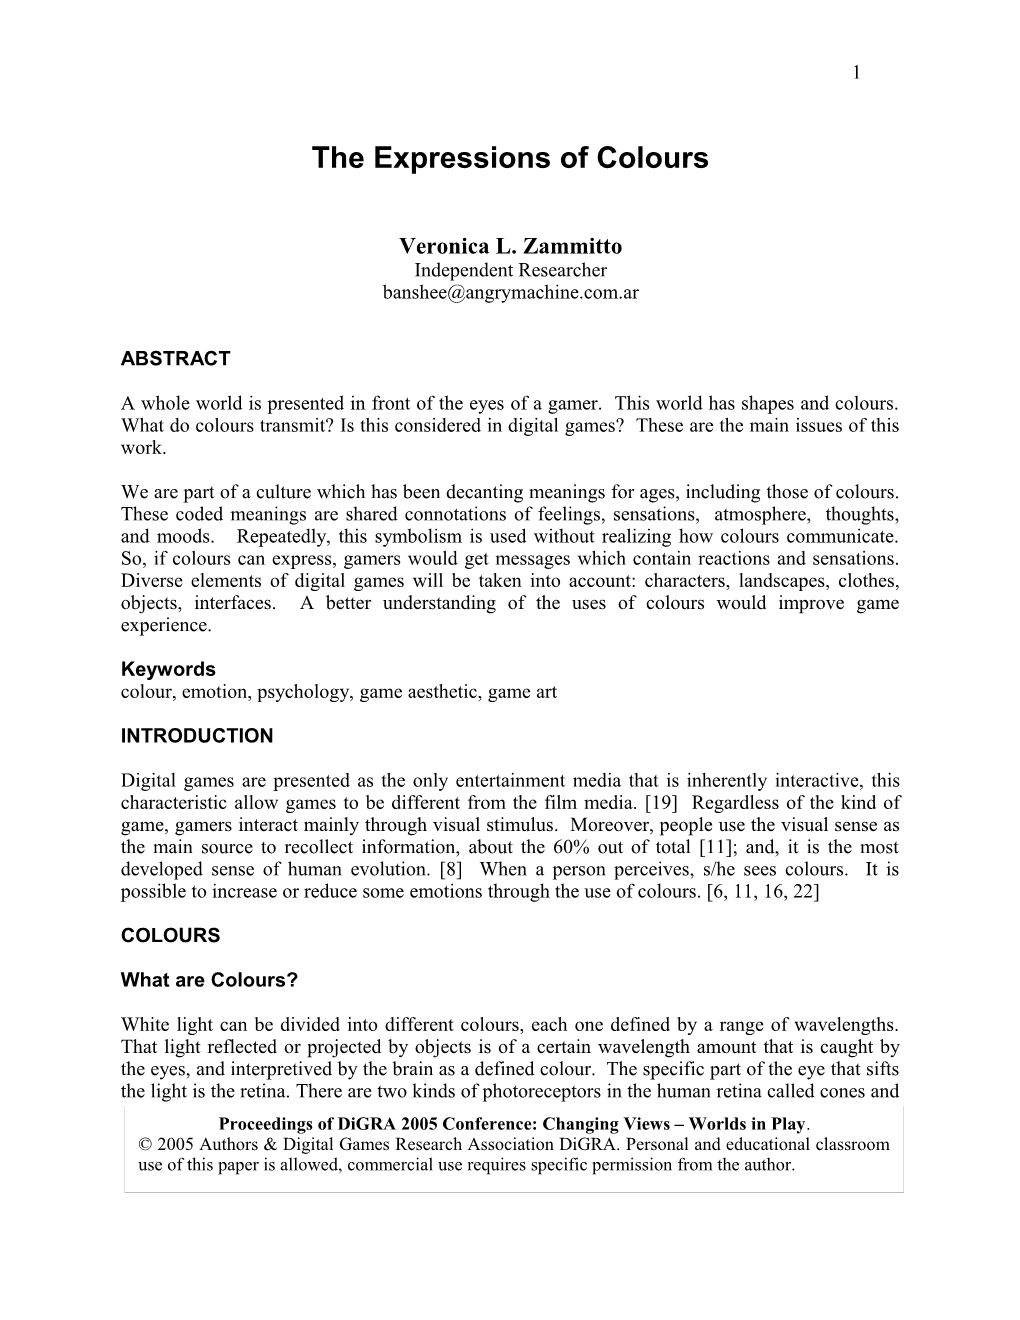 The Expressions of Colours